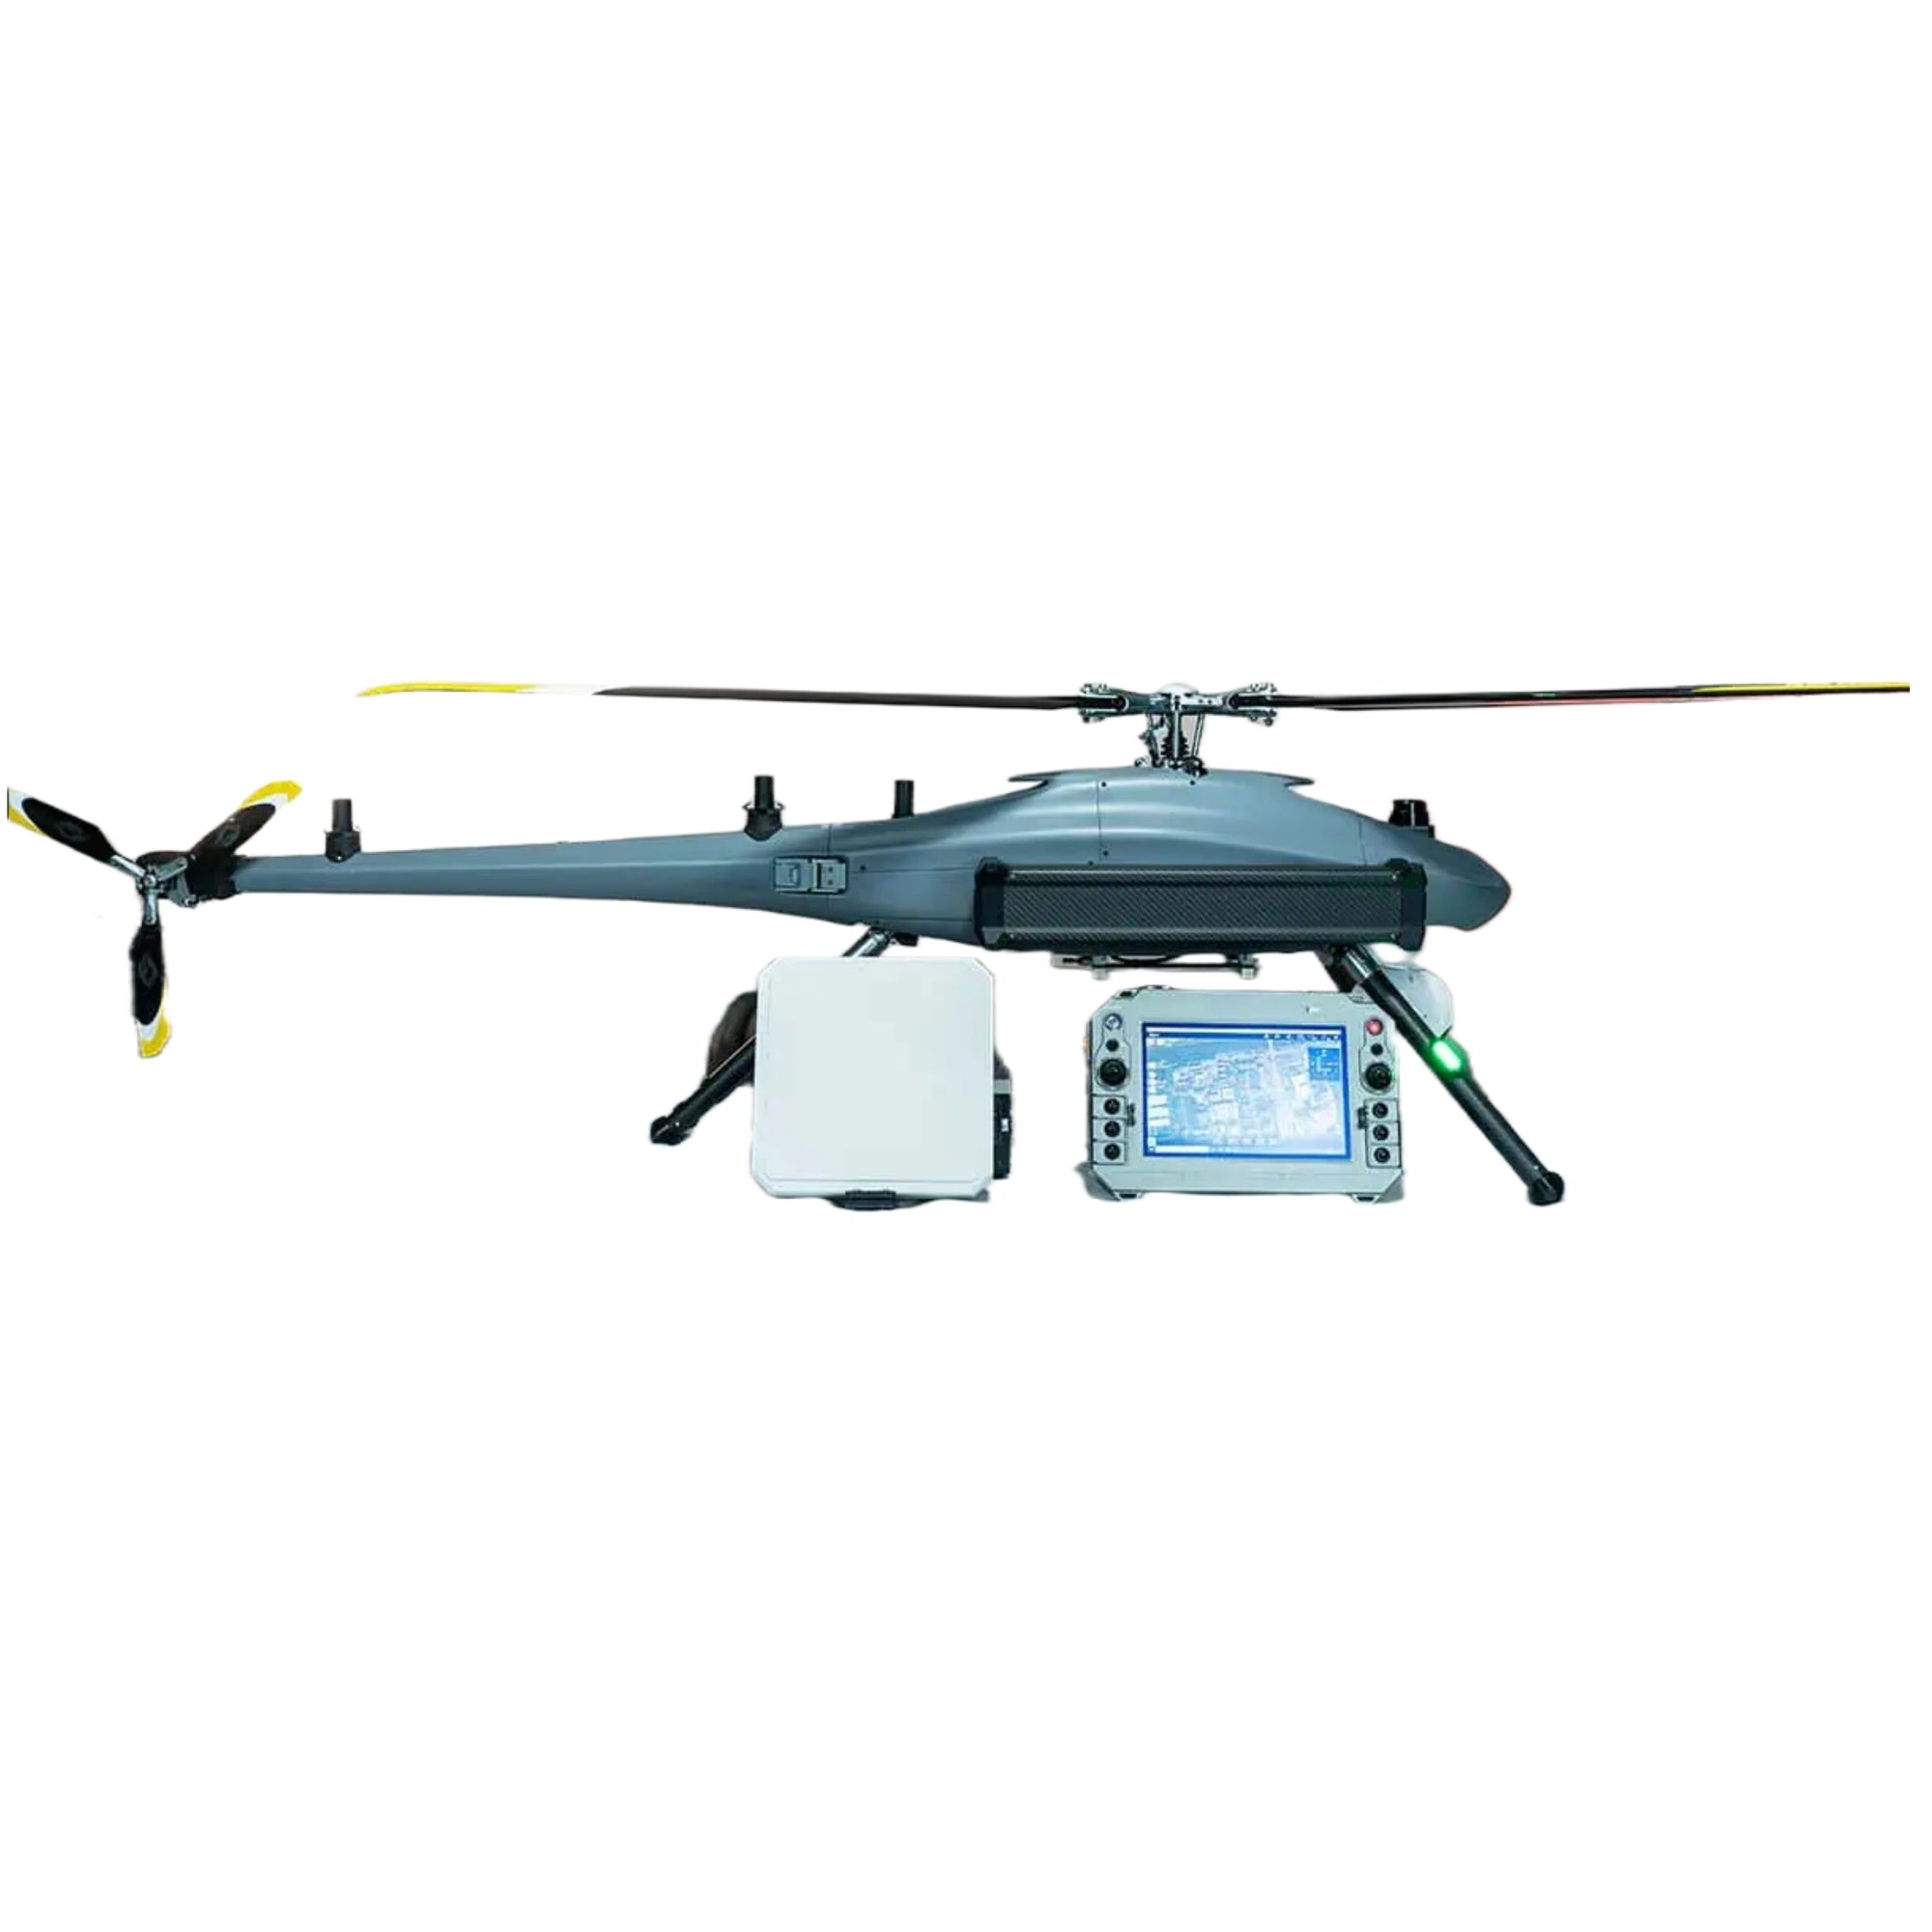 Dragonfly-10 Electric Unmanned Helicopters-7kg Mission Payload 50 Mins - Unmanned RC